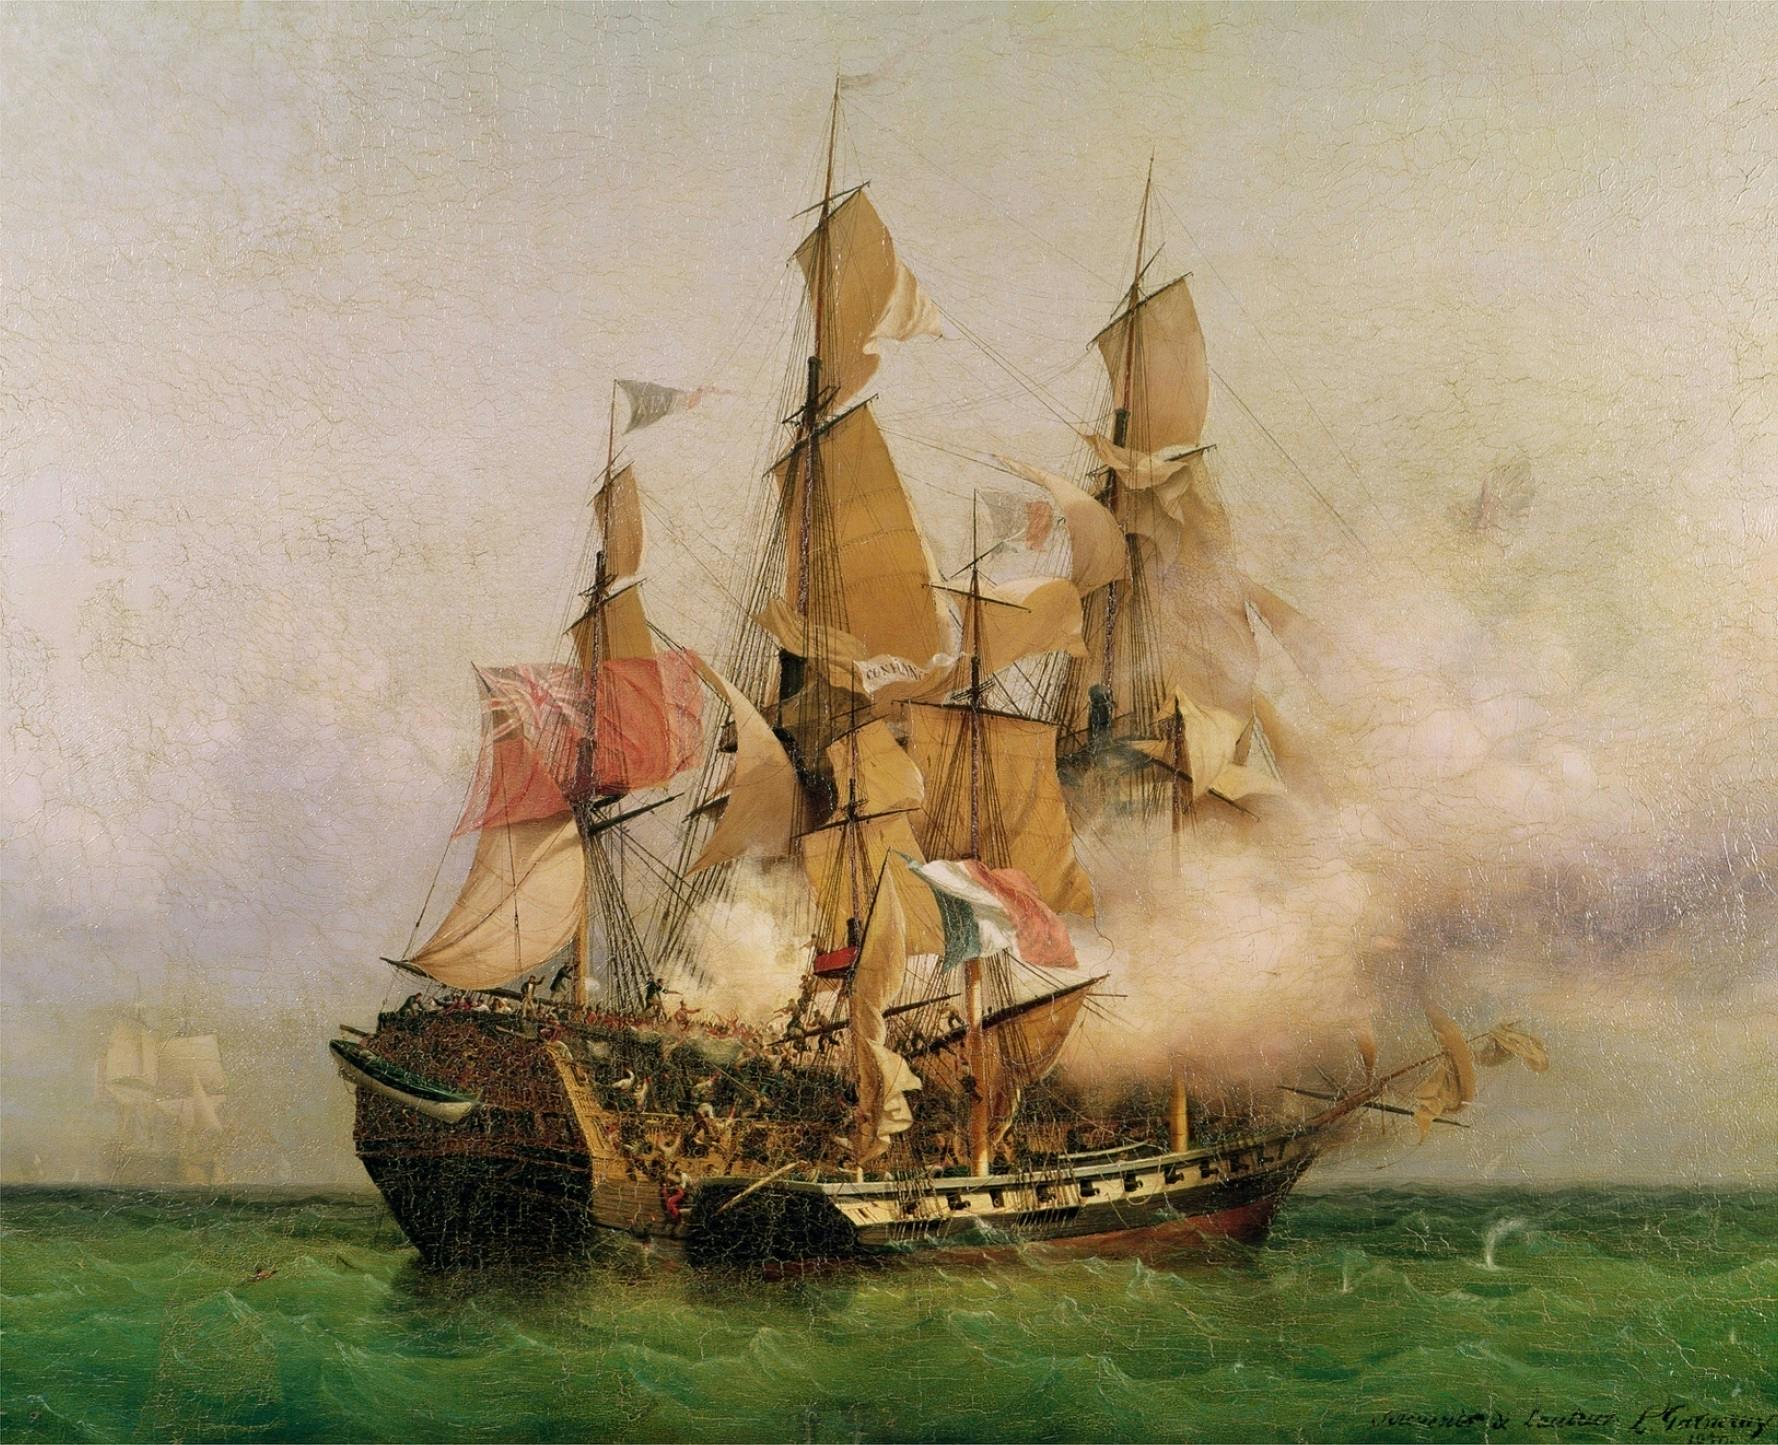 French ‘Corsairing’ in the Americas during the War of the Spanish Succession by Mike LaMonica